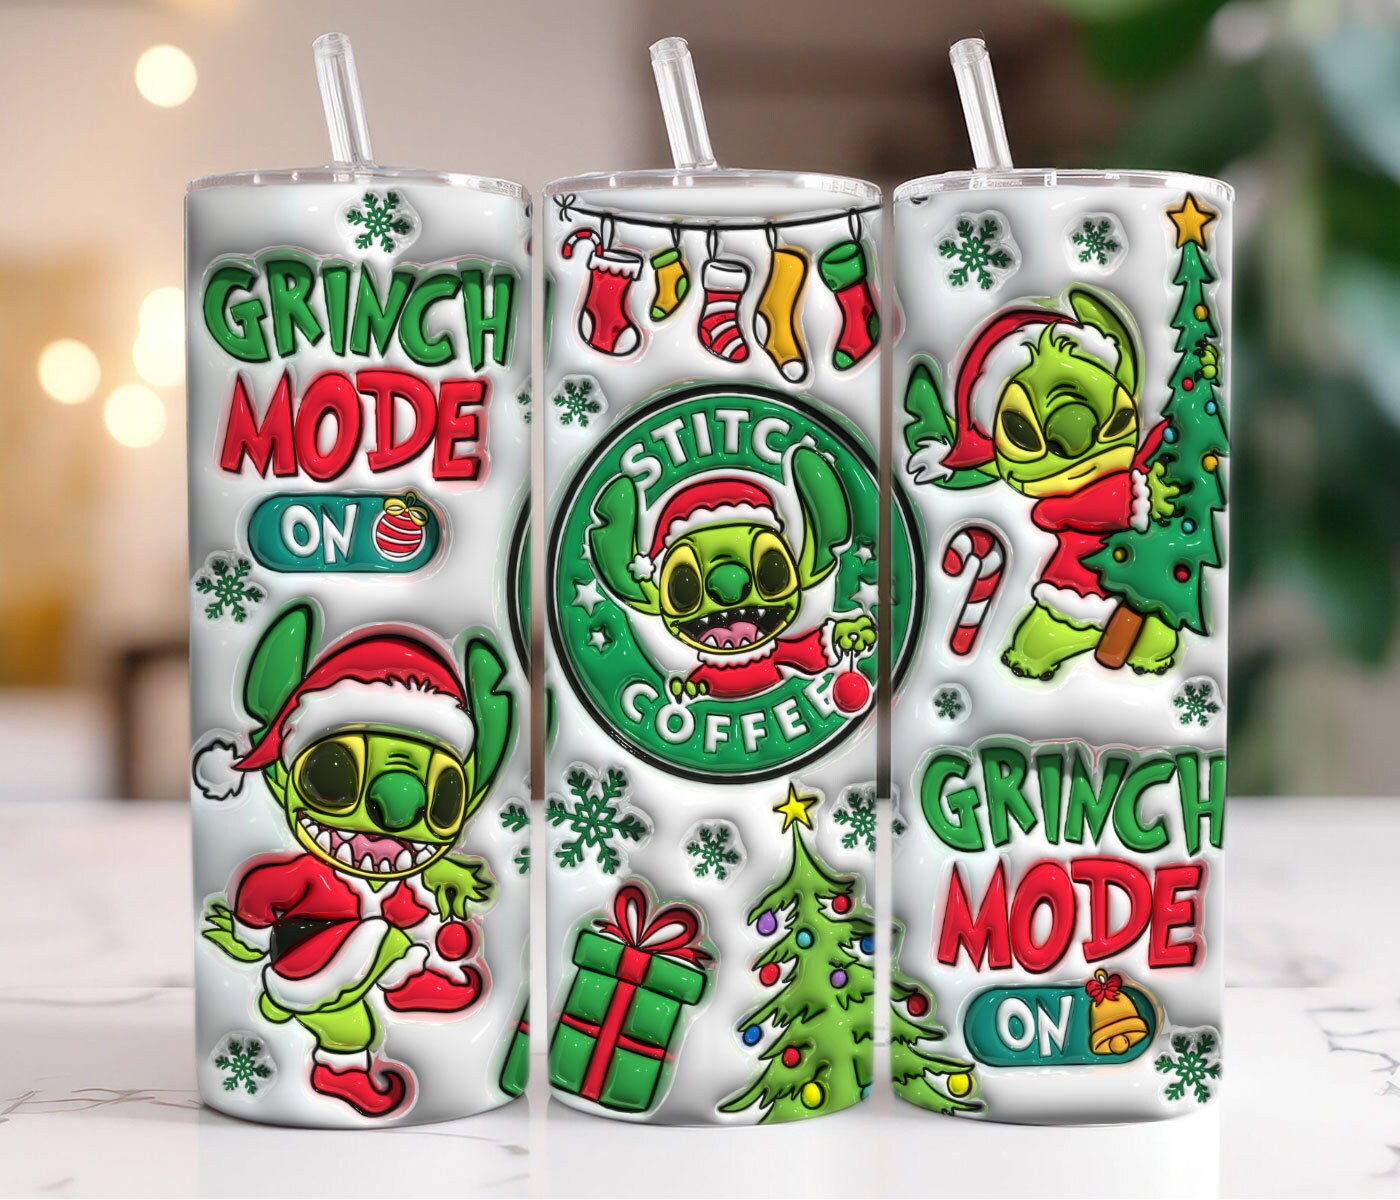 3D Inflated Christmas Coffee Tumbler, Puffy Christmas, Cartoon Christmas Png, 20oz Tumbler, Christmas Vibes, Funny Christmas, Png Download - VartDigitals